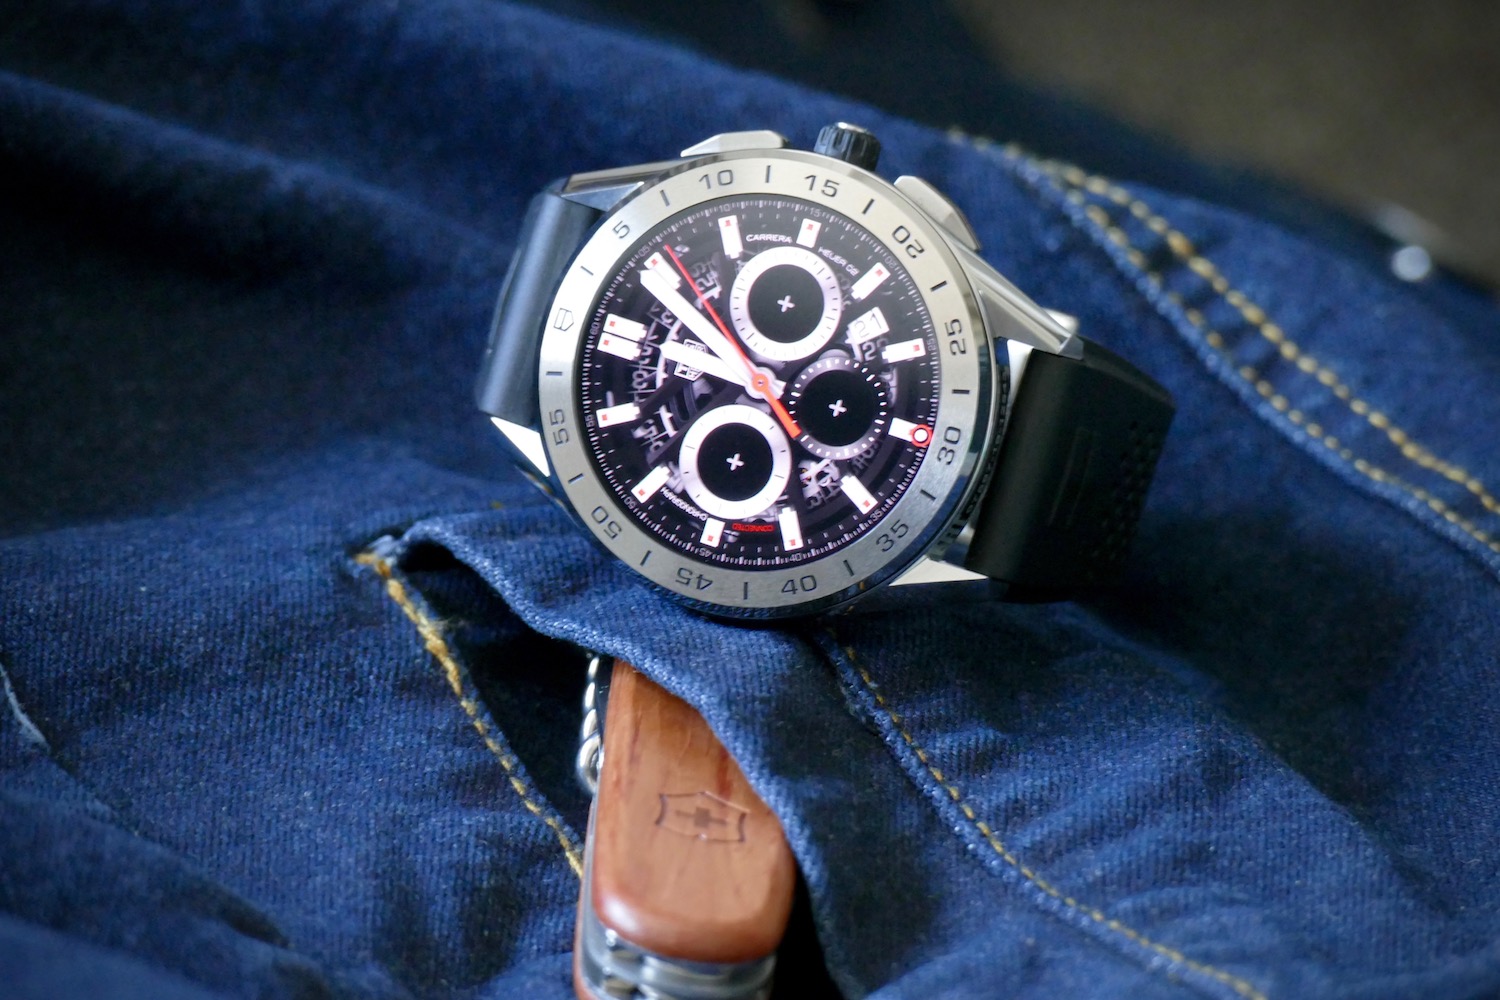 Can A High-Tech Smartwatch Be Eternal? TAG Heuer Thinks So